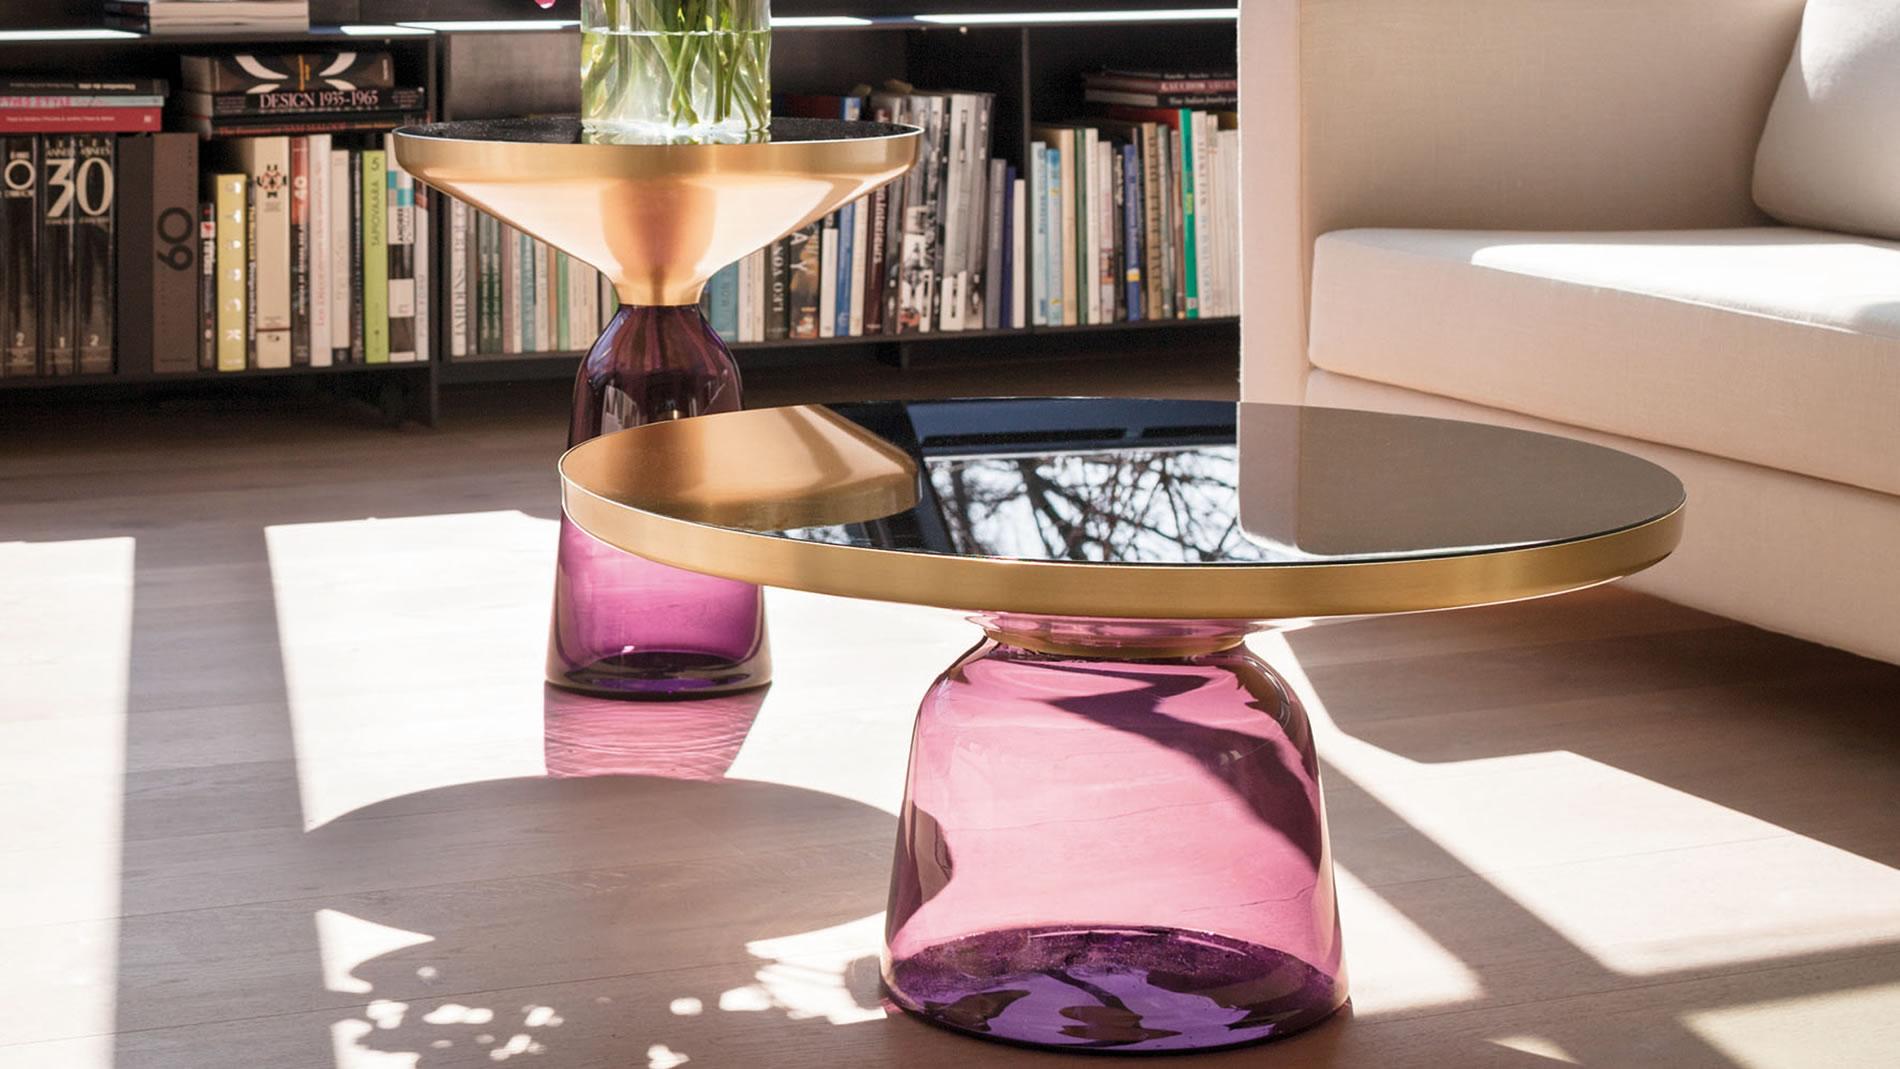 bell side table